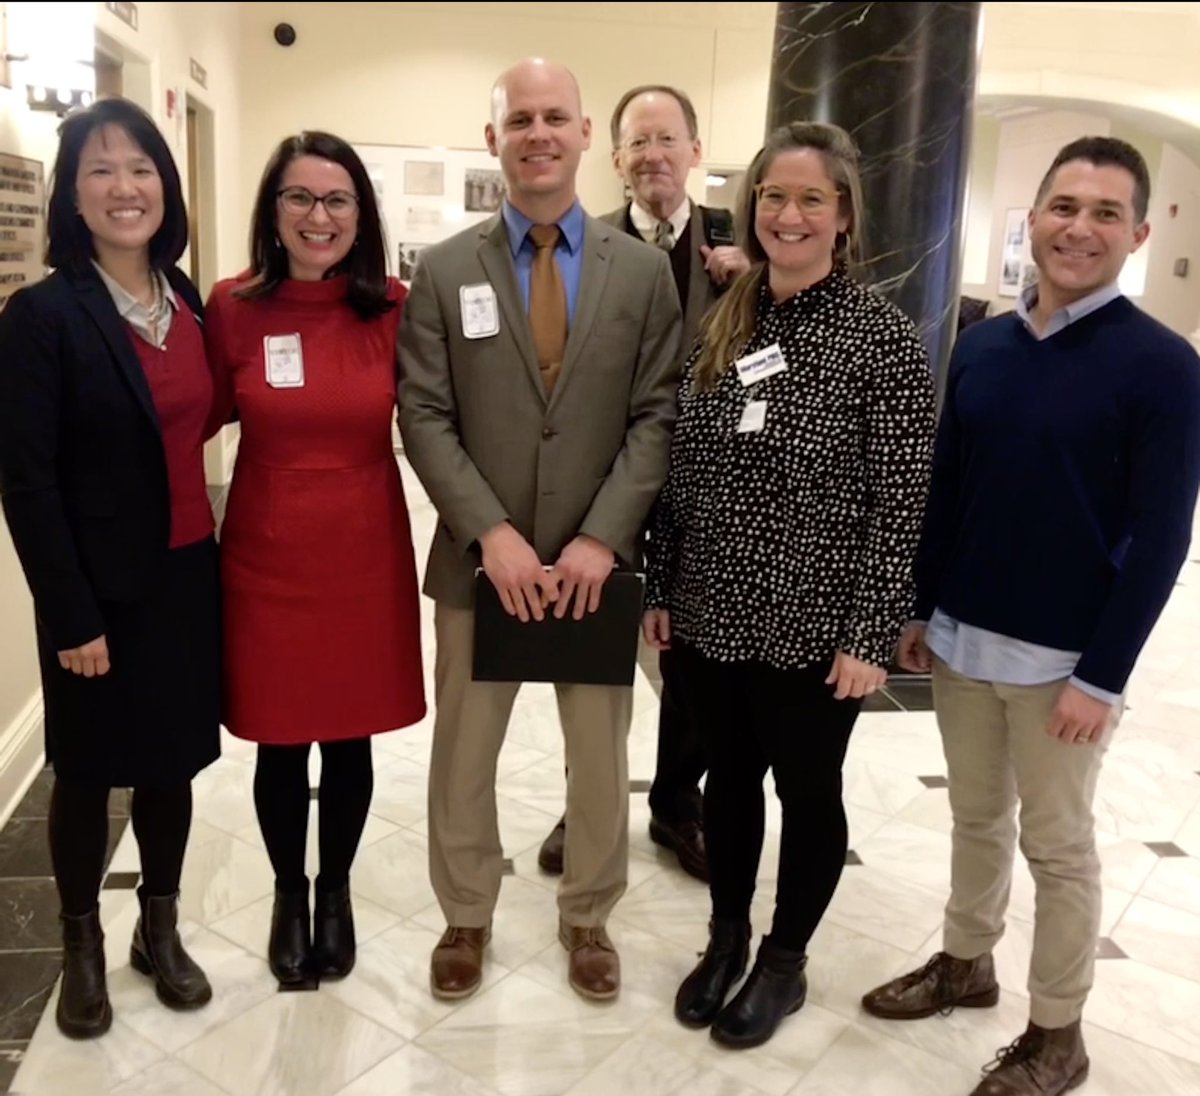 We’re in Annapolis today with doctors, nurses, business owners, famers, and public health groups to support SB471/HB652 to implement the Keep Antibiotics Effective Act! Let’s reserve antibiotics for when they are needed most: sickness and surgery. #mdga19